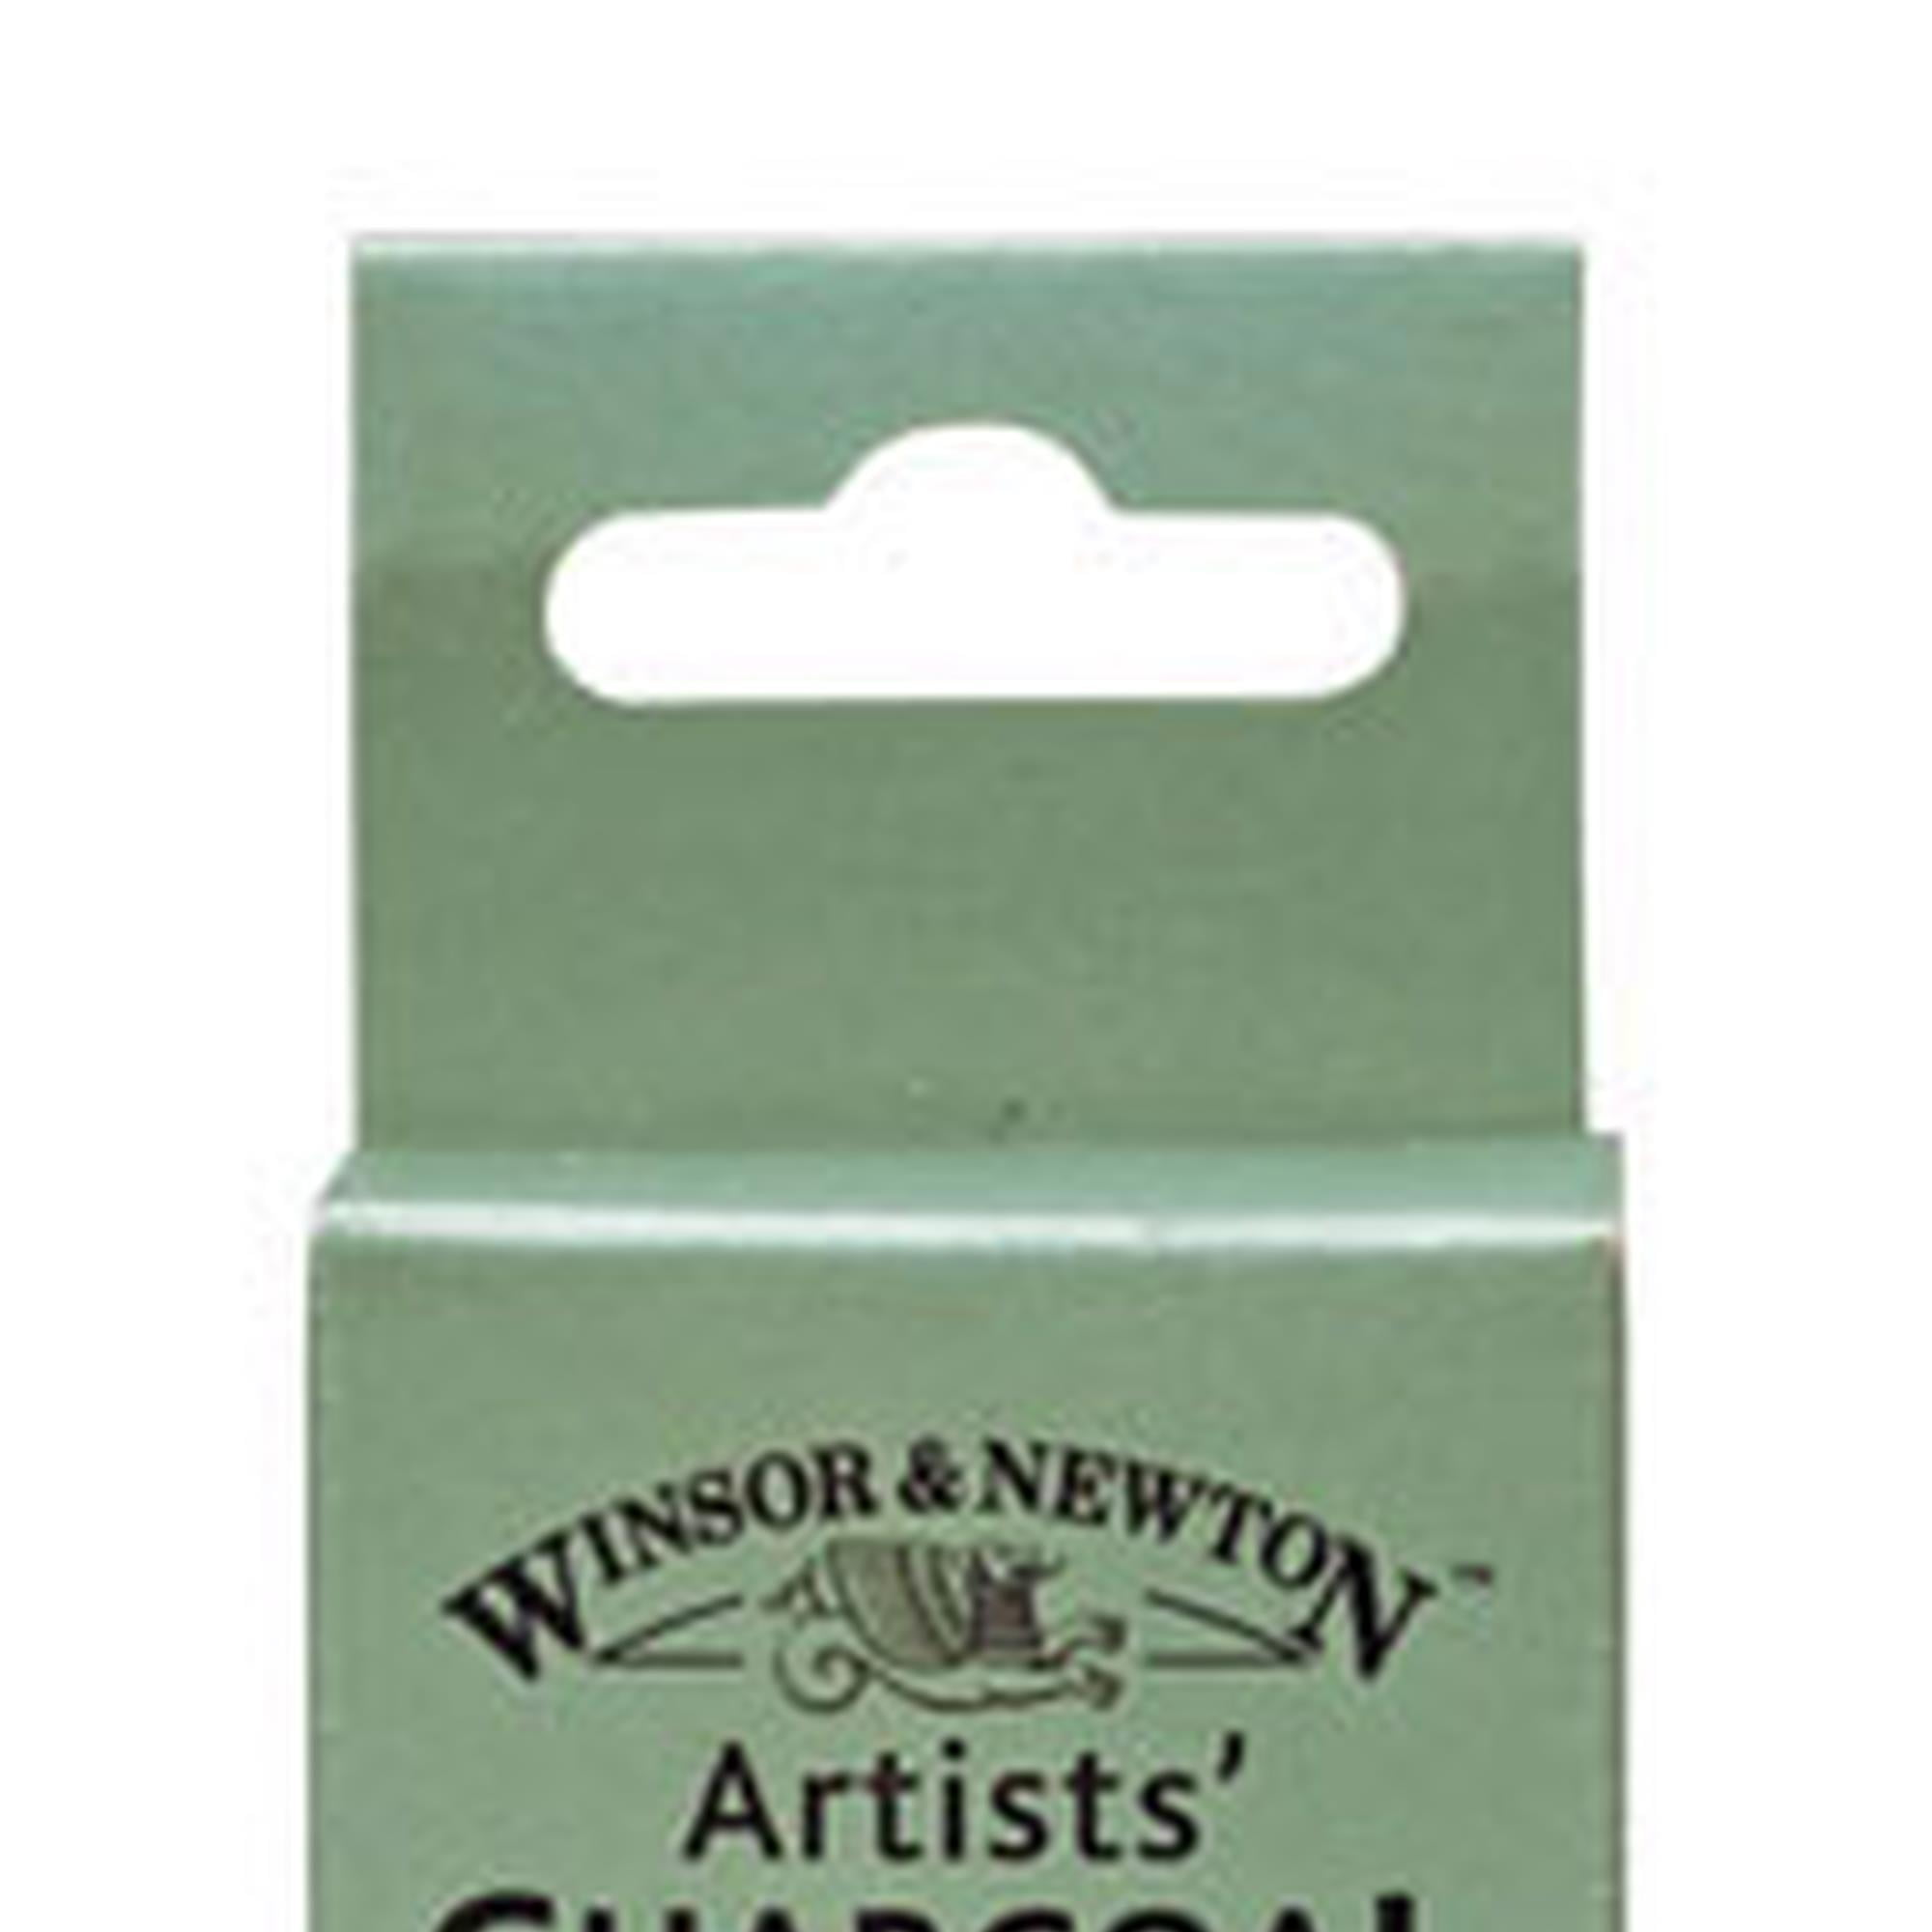  Winsor & Newton Artists' Willow Charcoal, Thin, Box of 12